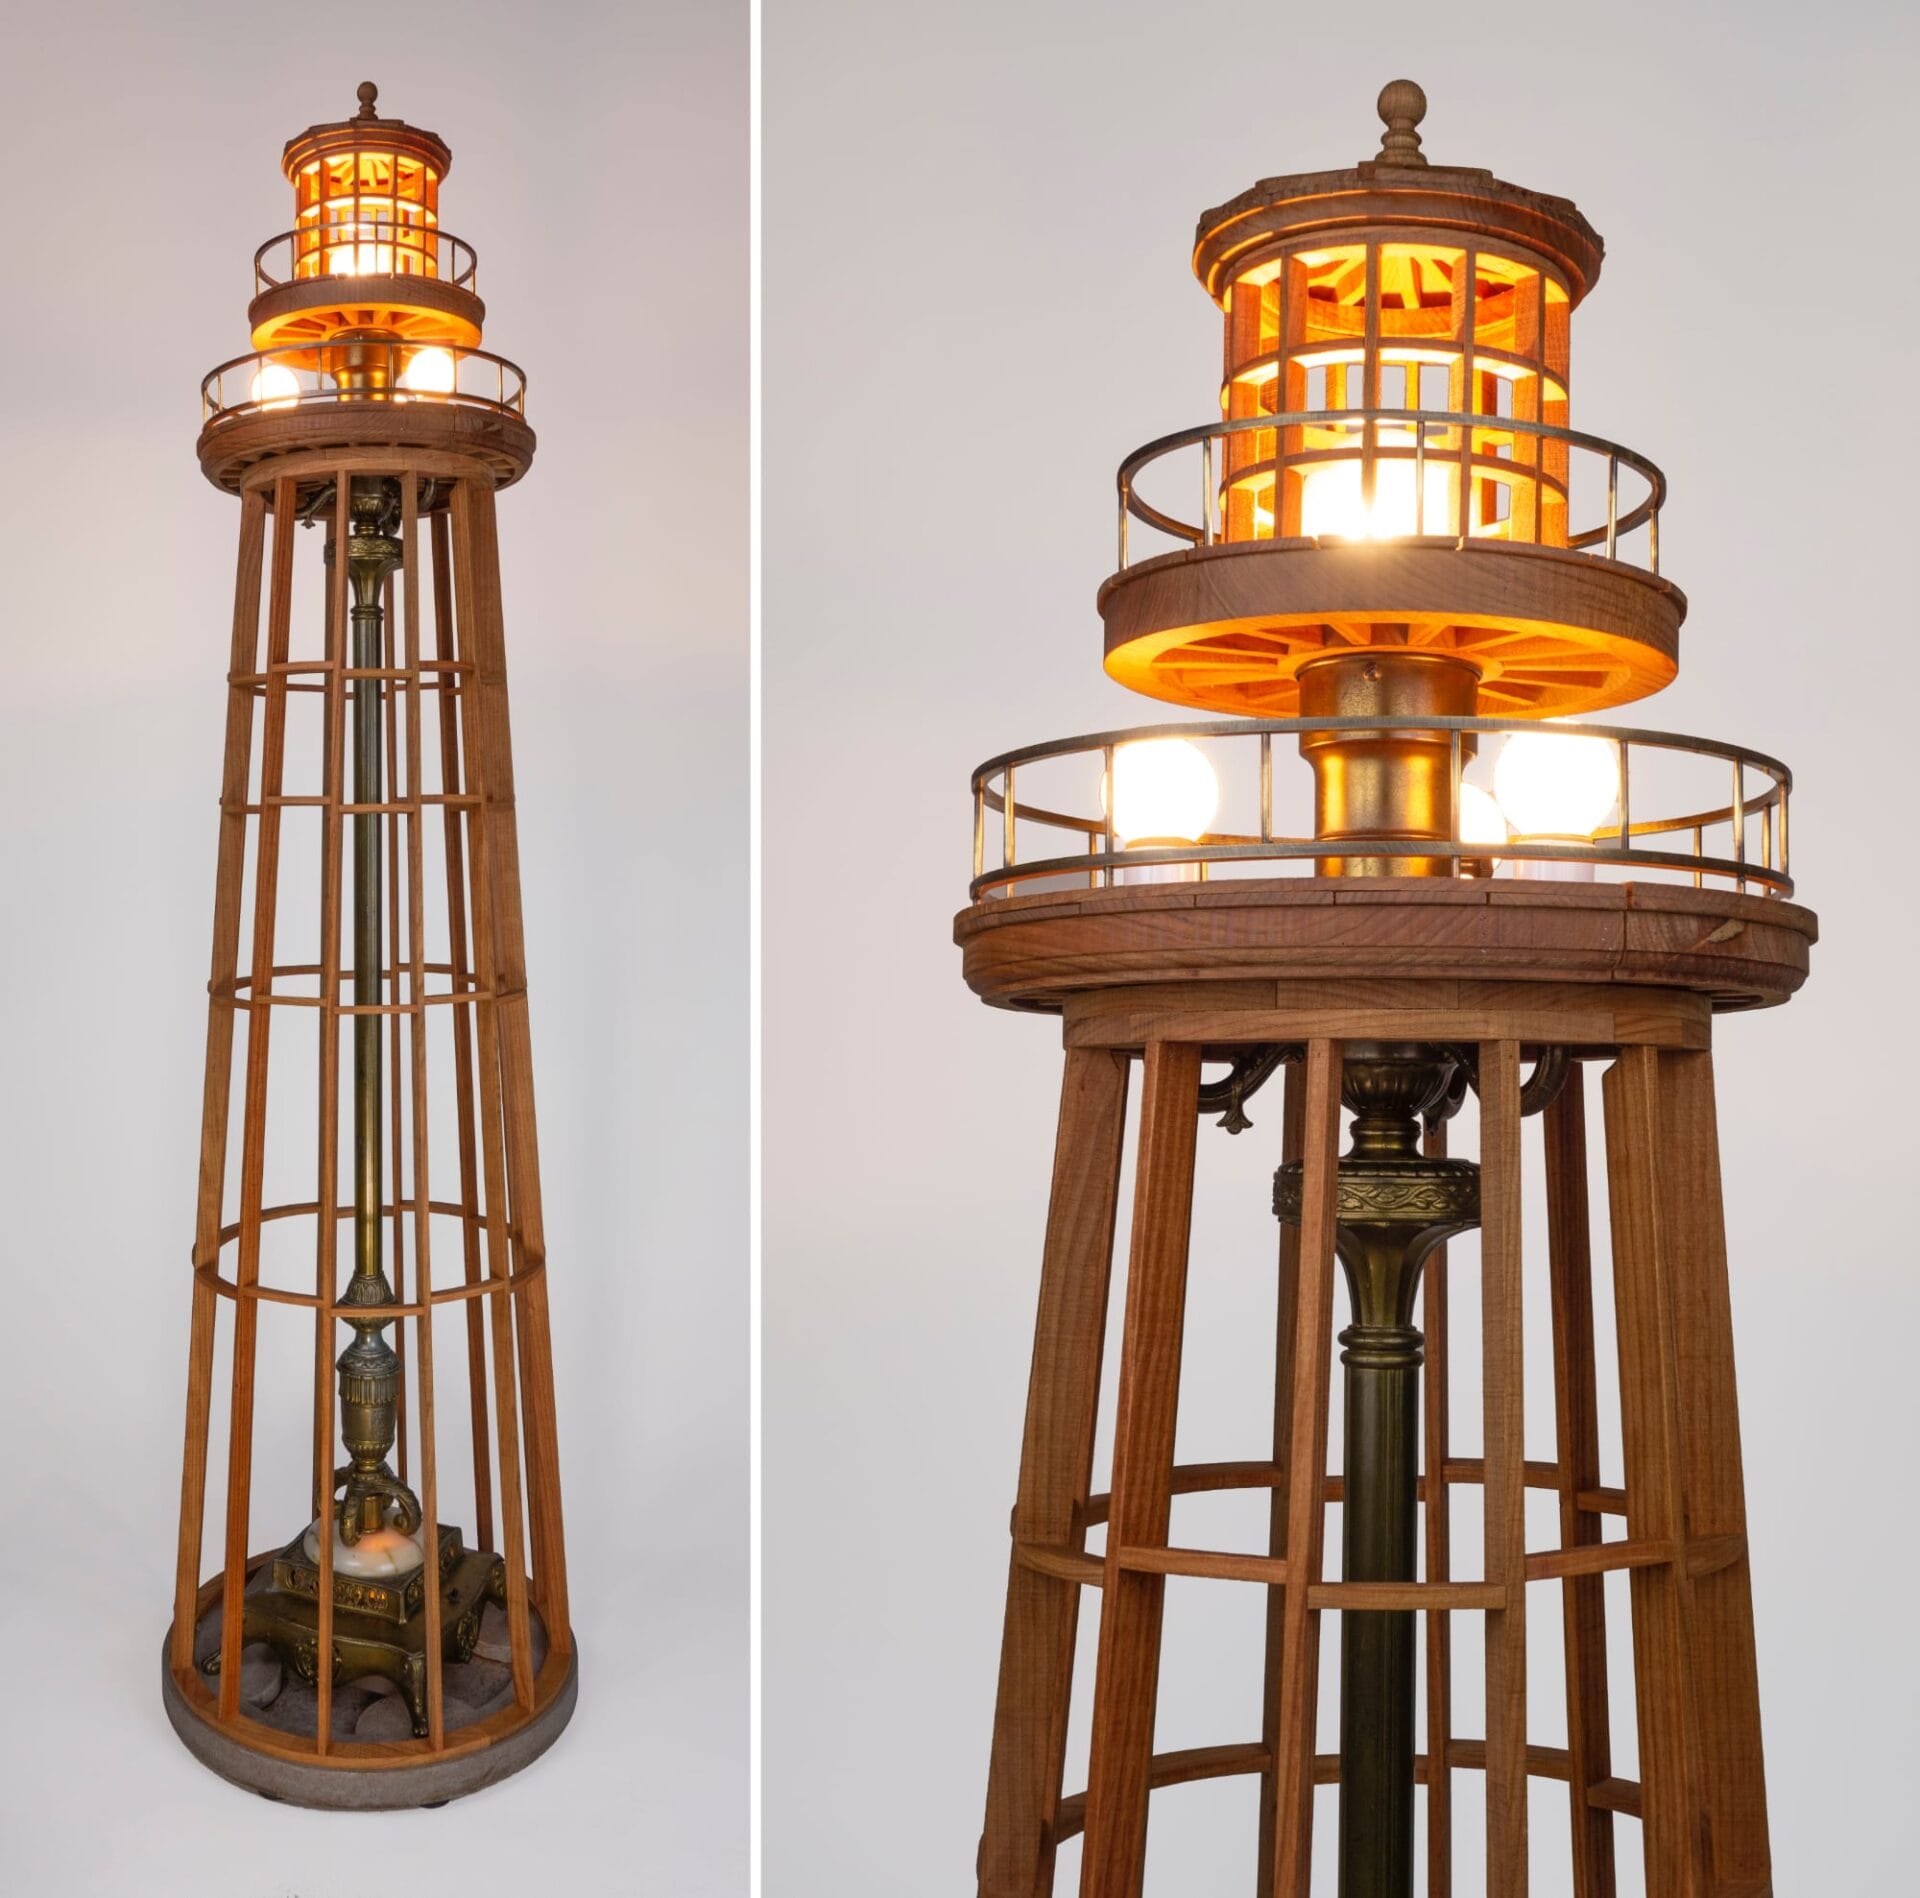 two images of a lamp with an architectural lighthouse structure surrounding it. the right image is a detail shot showing four embedded light bulbs